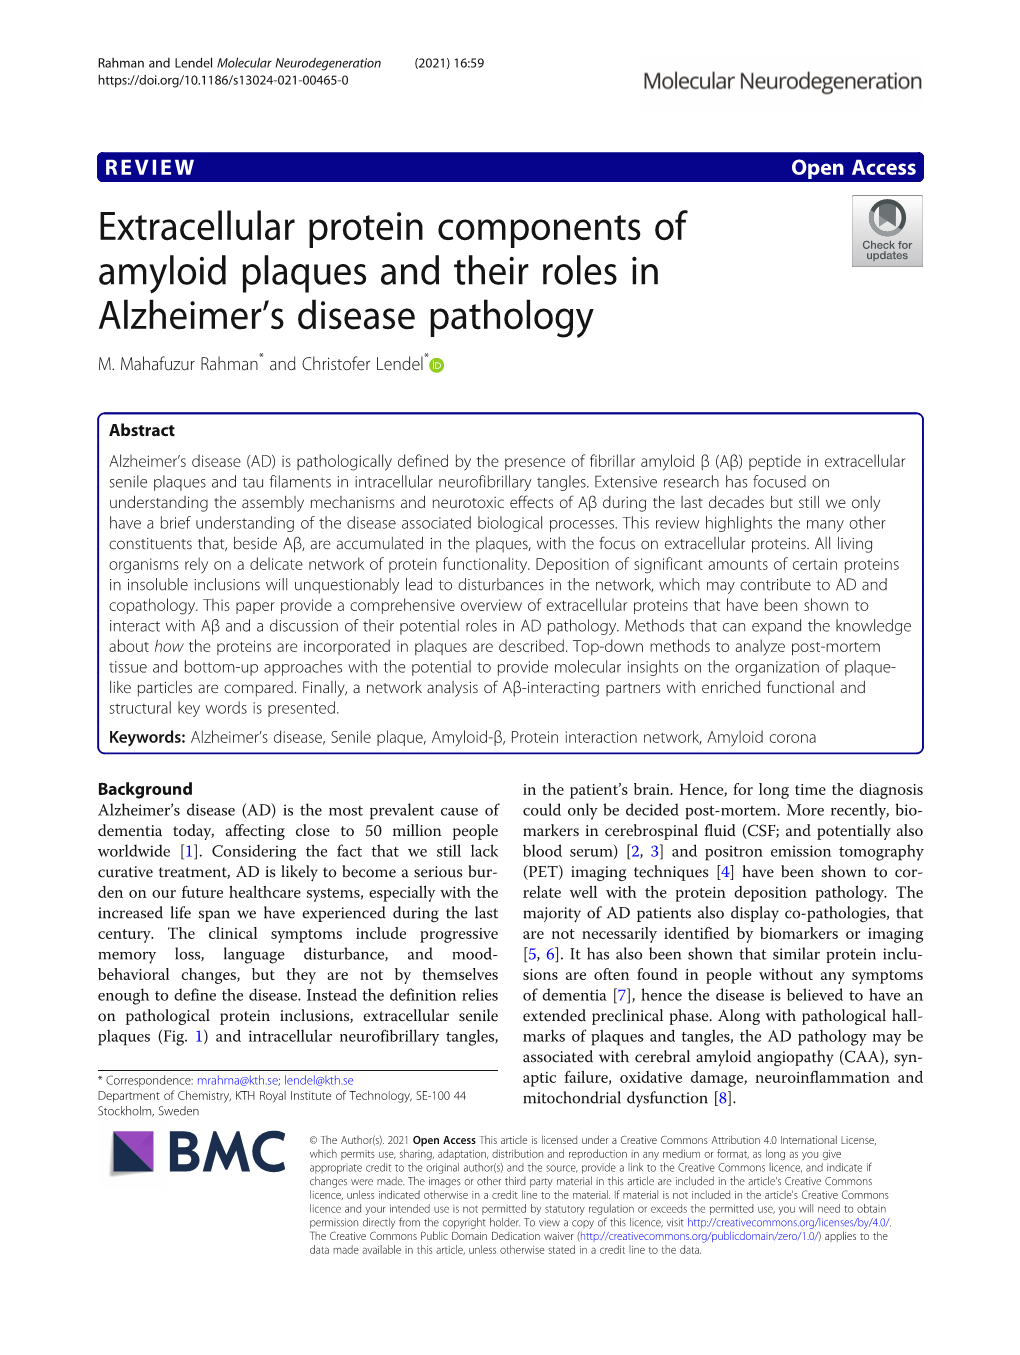 Extracellular Protein Components of Amyloid Plaques and Their Roles in Alzheimer’S Disease Pathology M